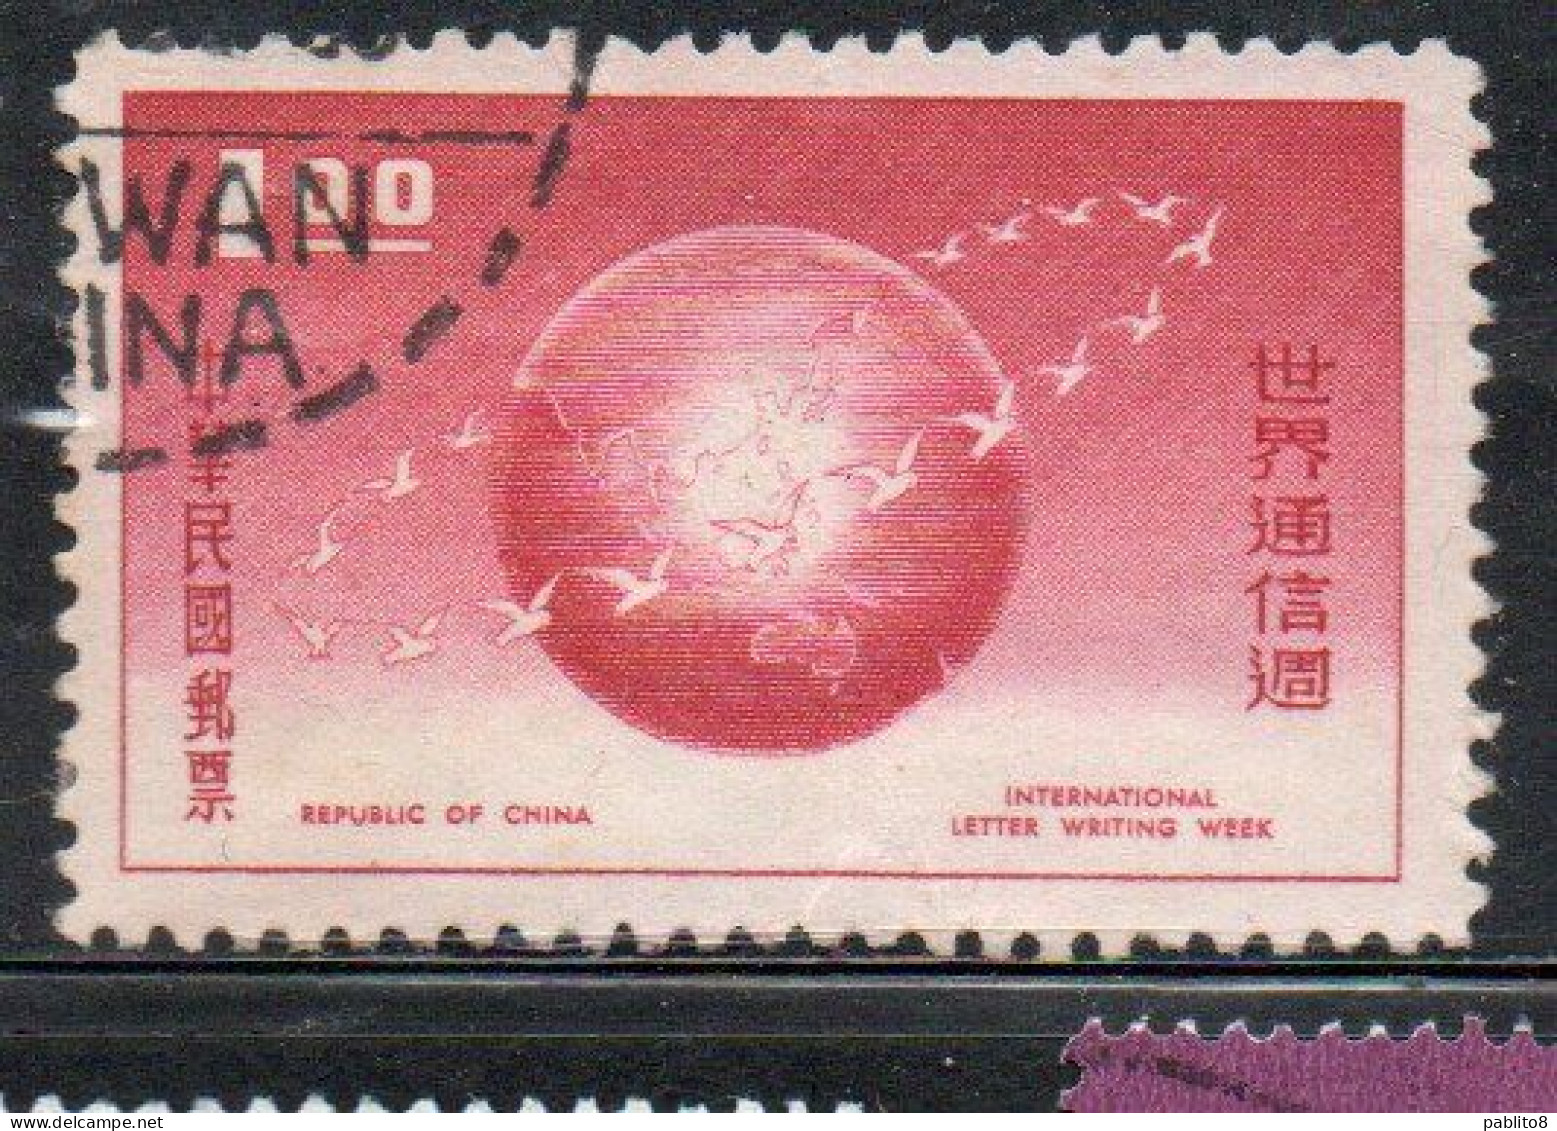 CHINA REPUBLIC CINA TAIWAN FORMOSA 1959 INTERNATIONAL LETTER WRITING WEEK 1$ USED USATO OBLITERE' - Used Stamps